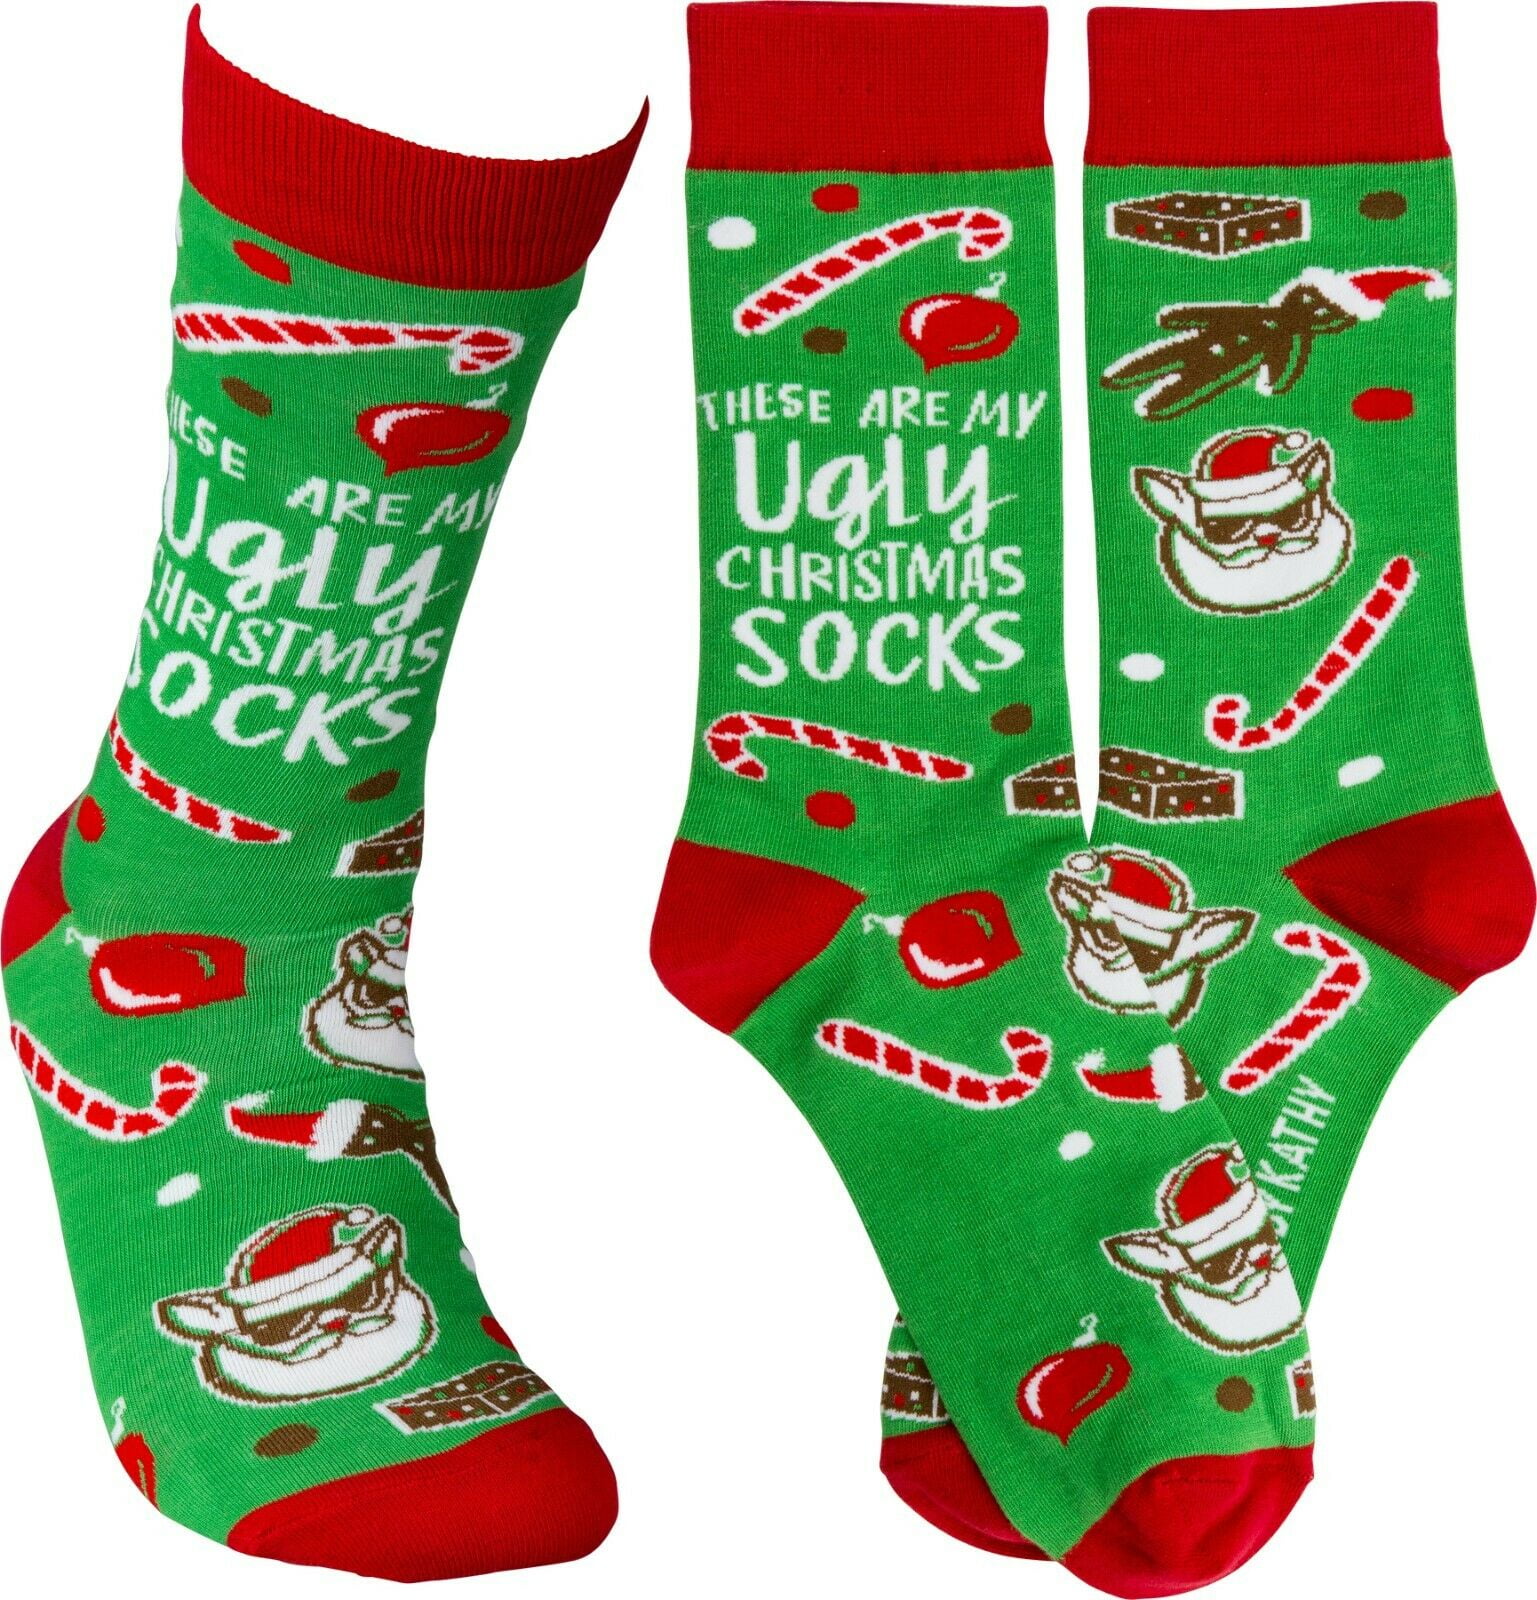 These Are My Ugly Christmas Socks - Primitives by Kathy Lol Socks ...